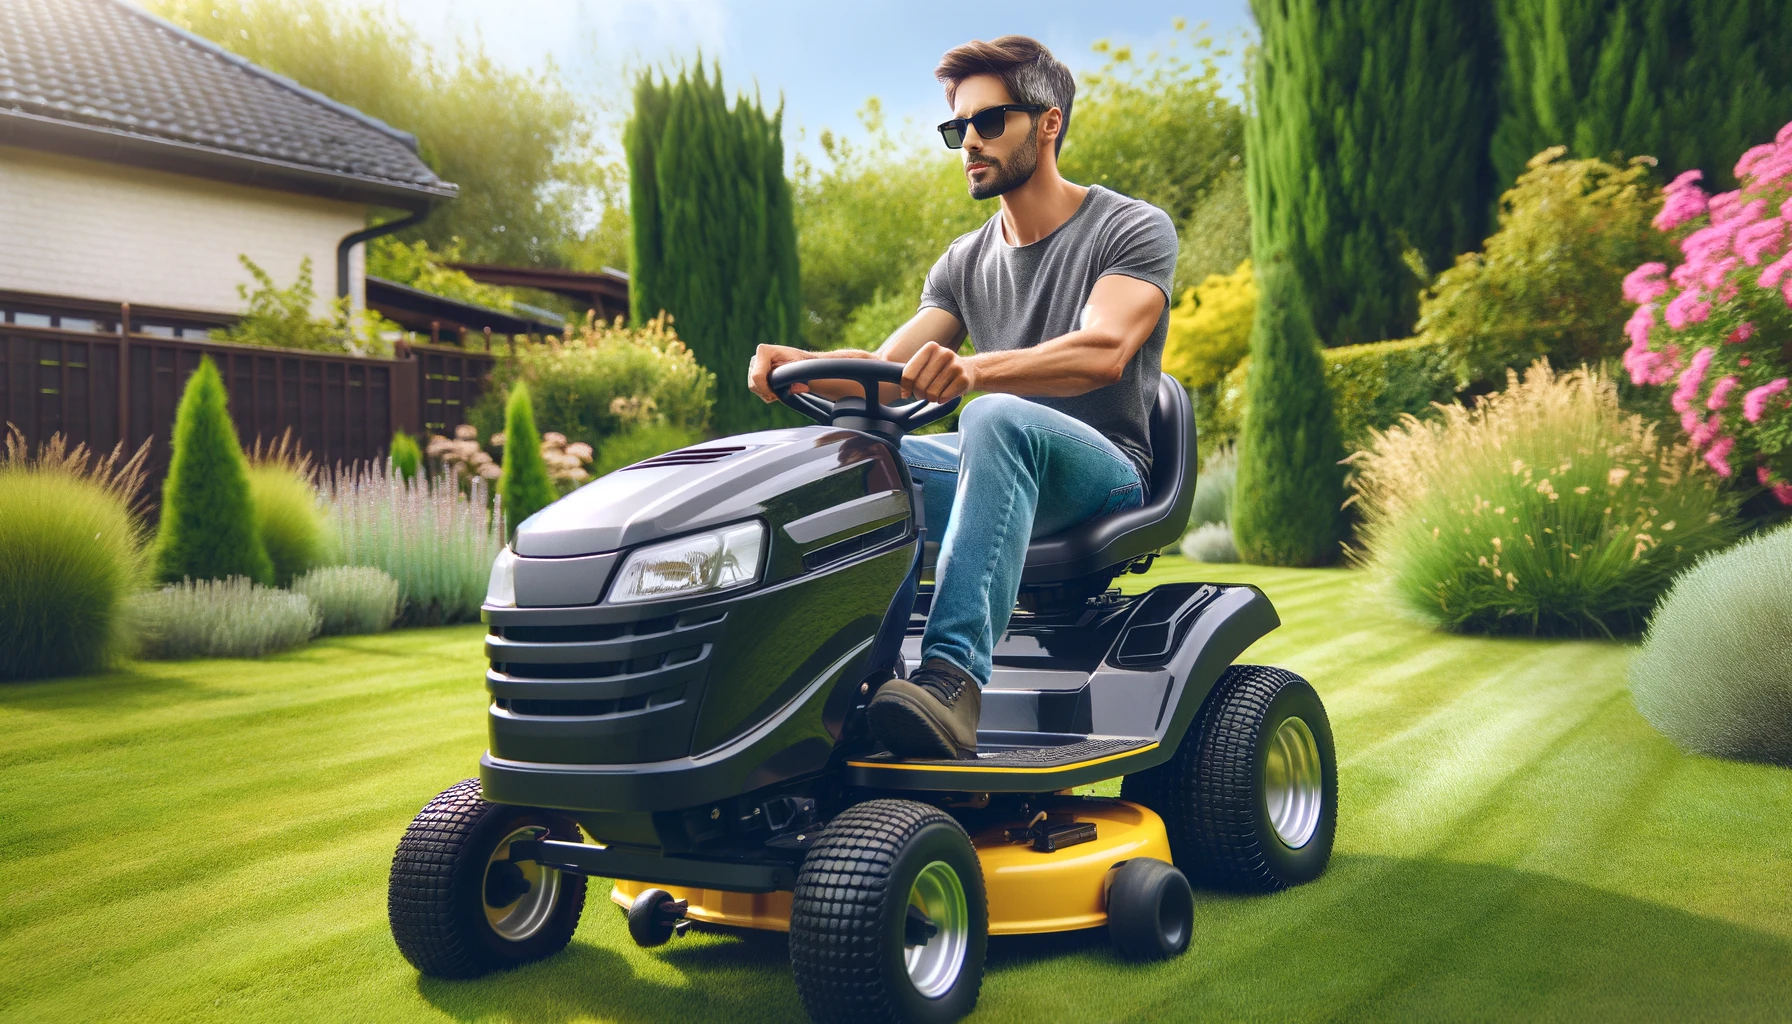 Riding mower tips and tricks